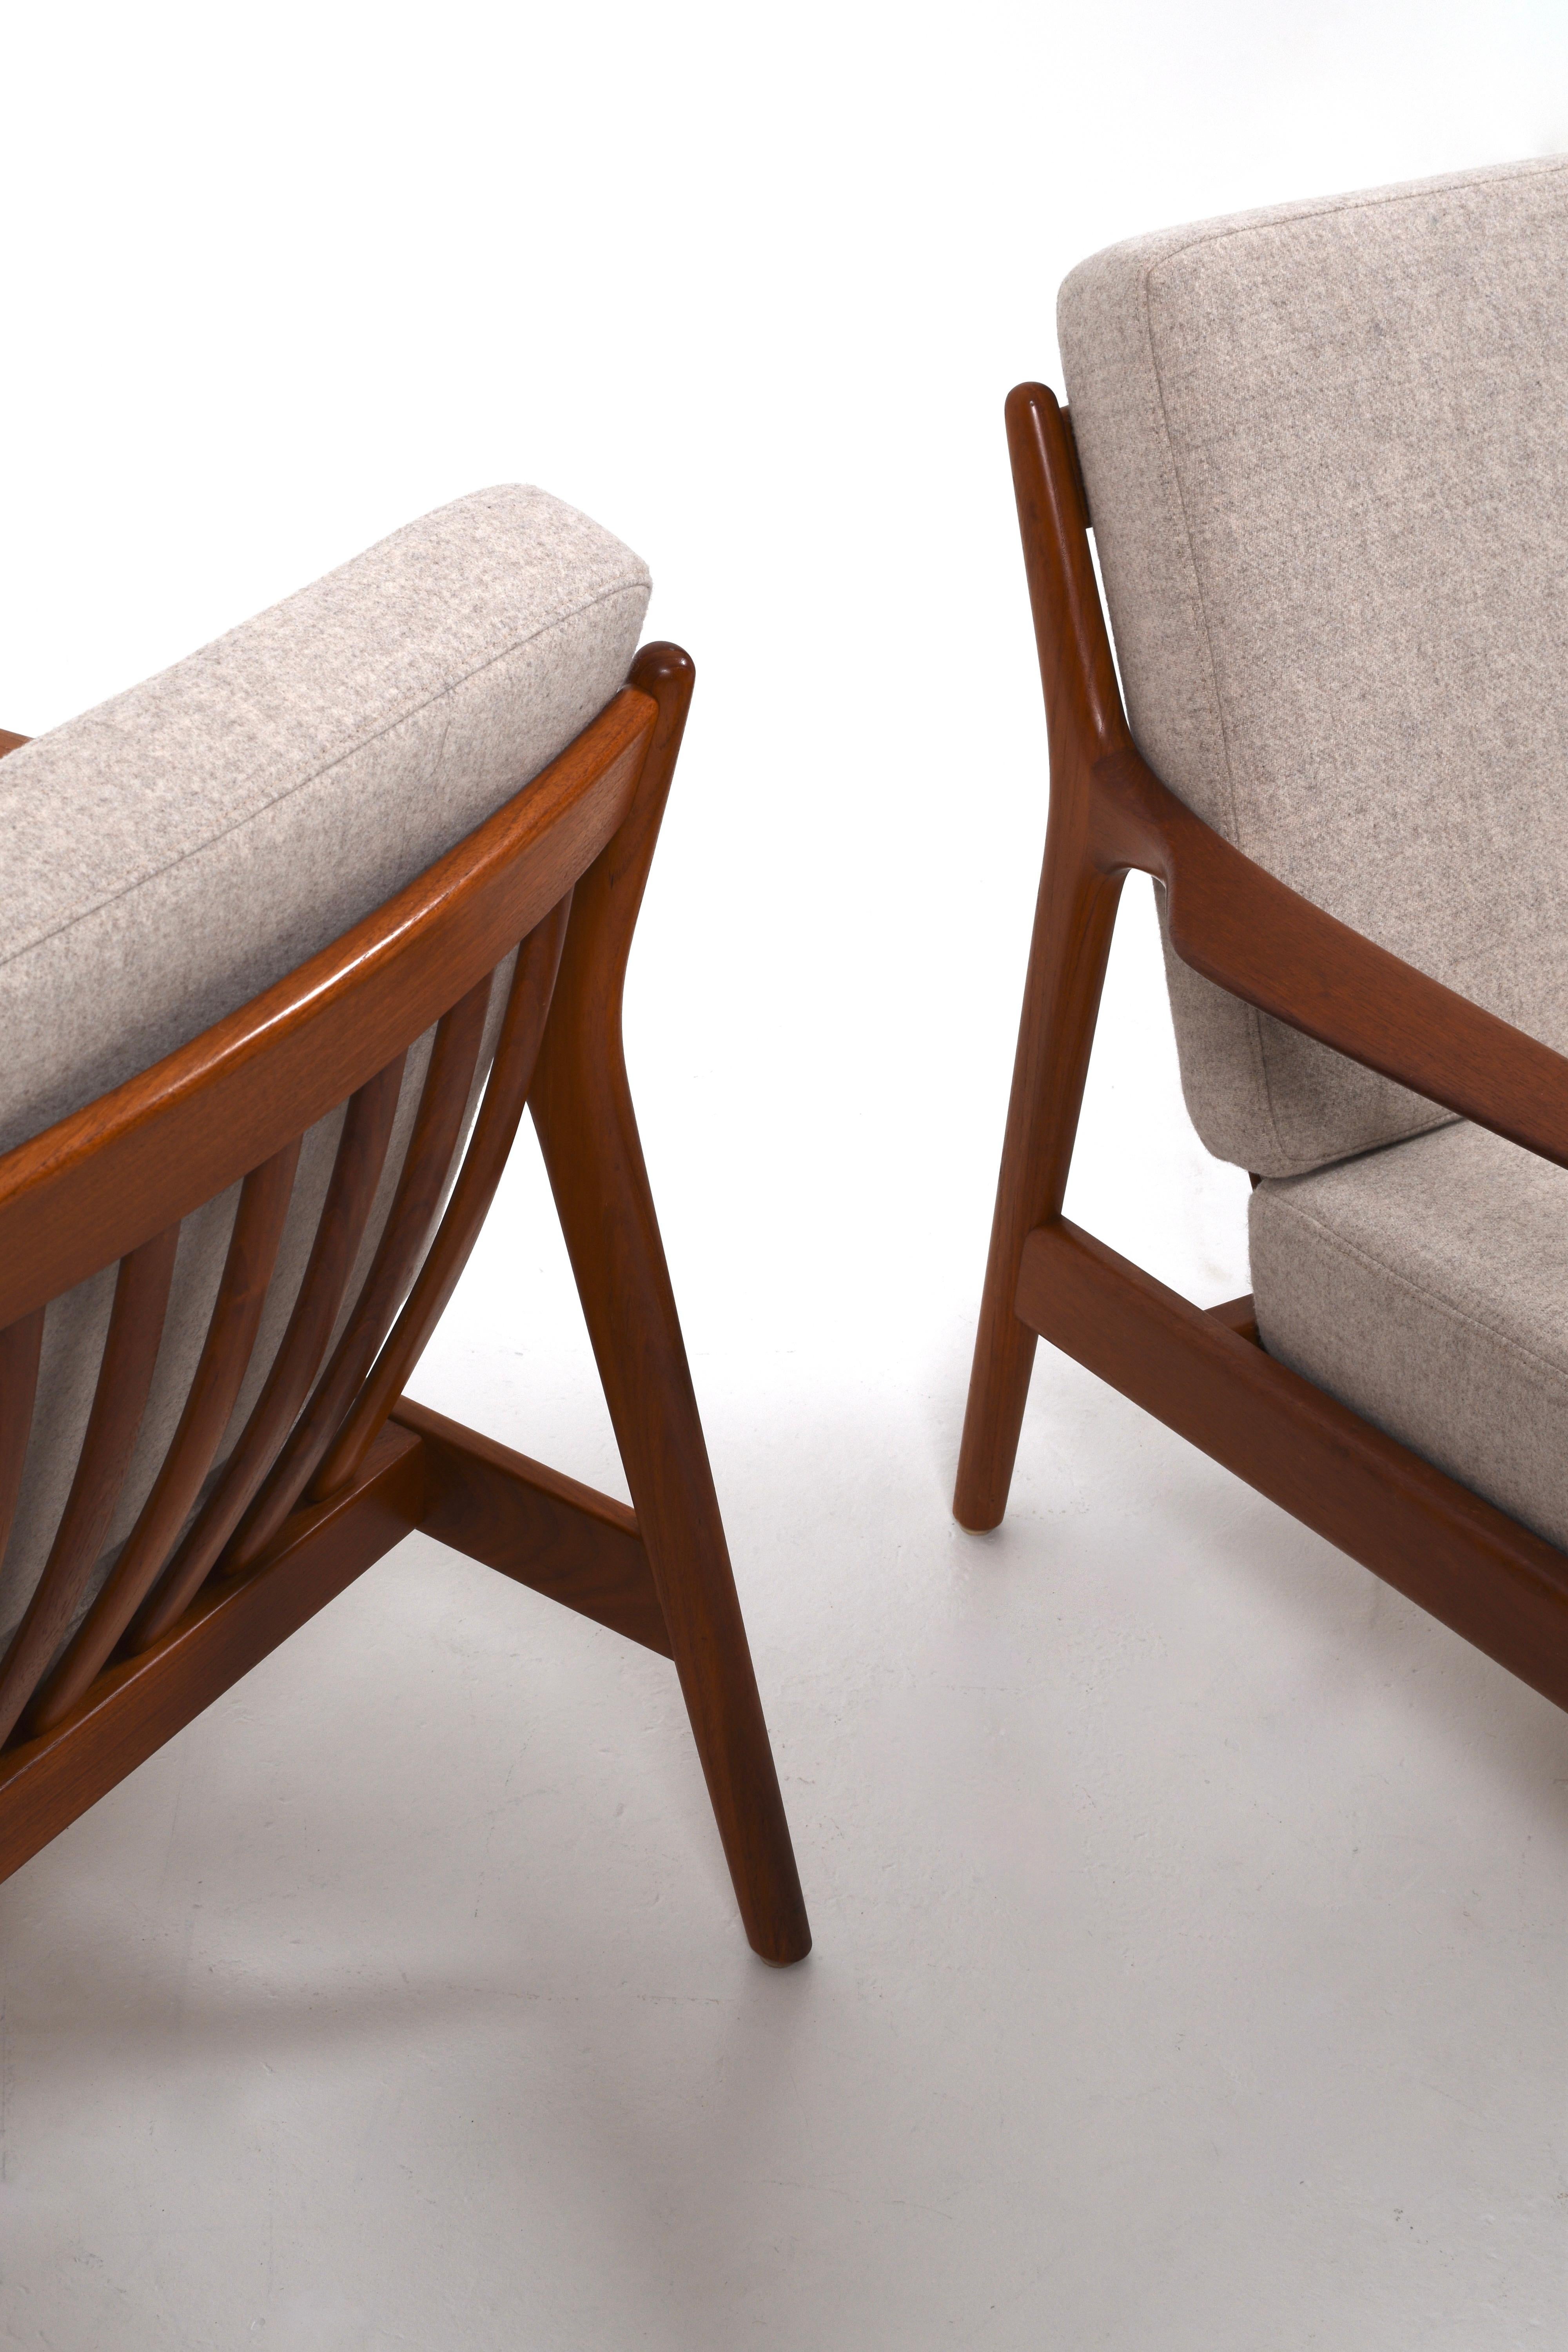 Wool Pair of “USA 75” Teak Lounge Chairs by Folke Ohlsson for DUX, Sweden, 1960s For Sale